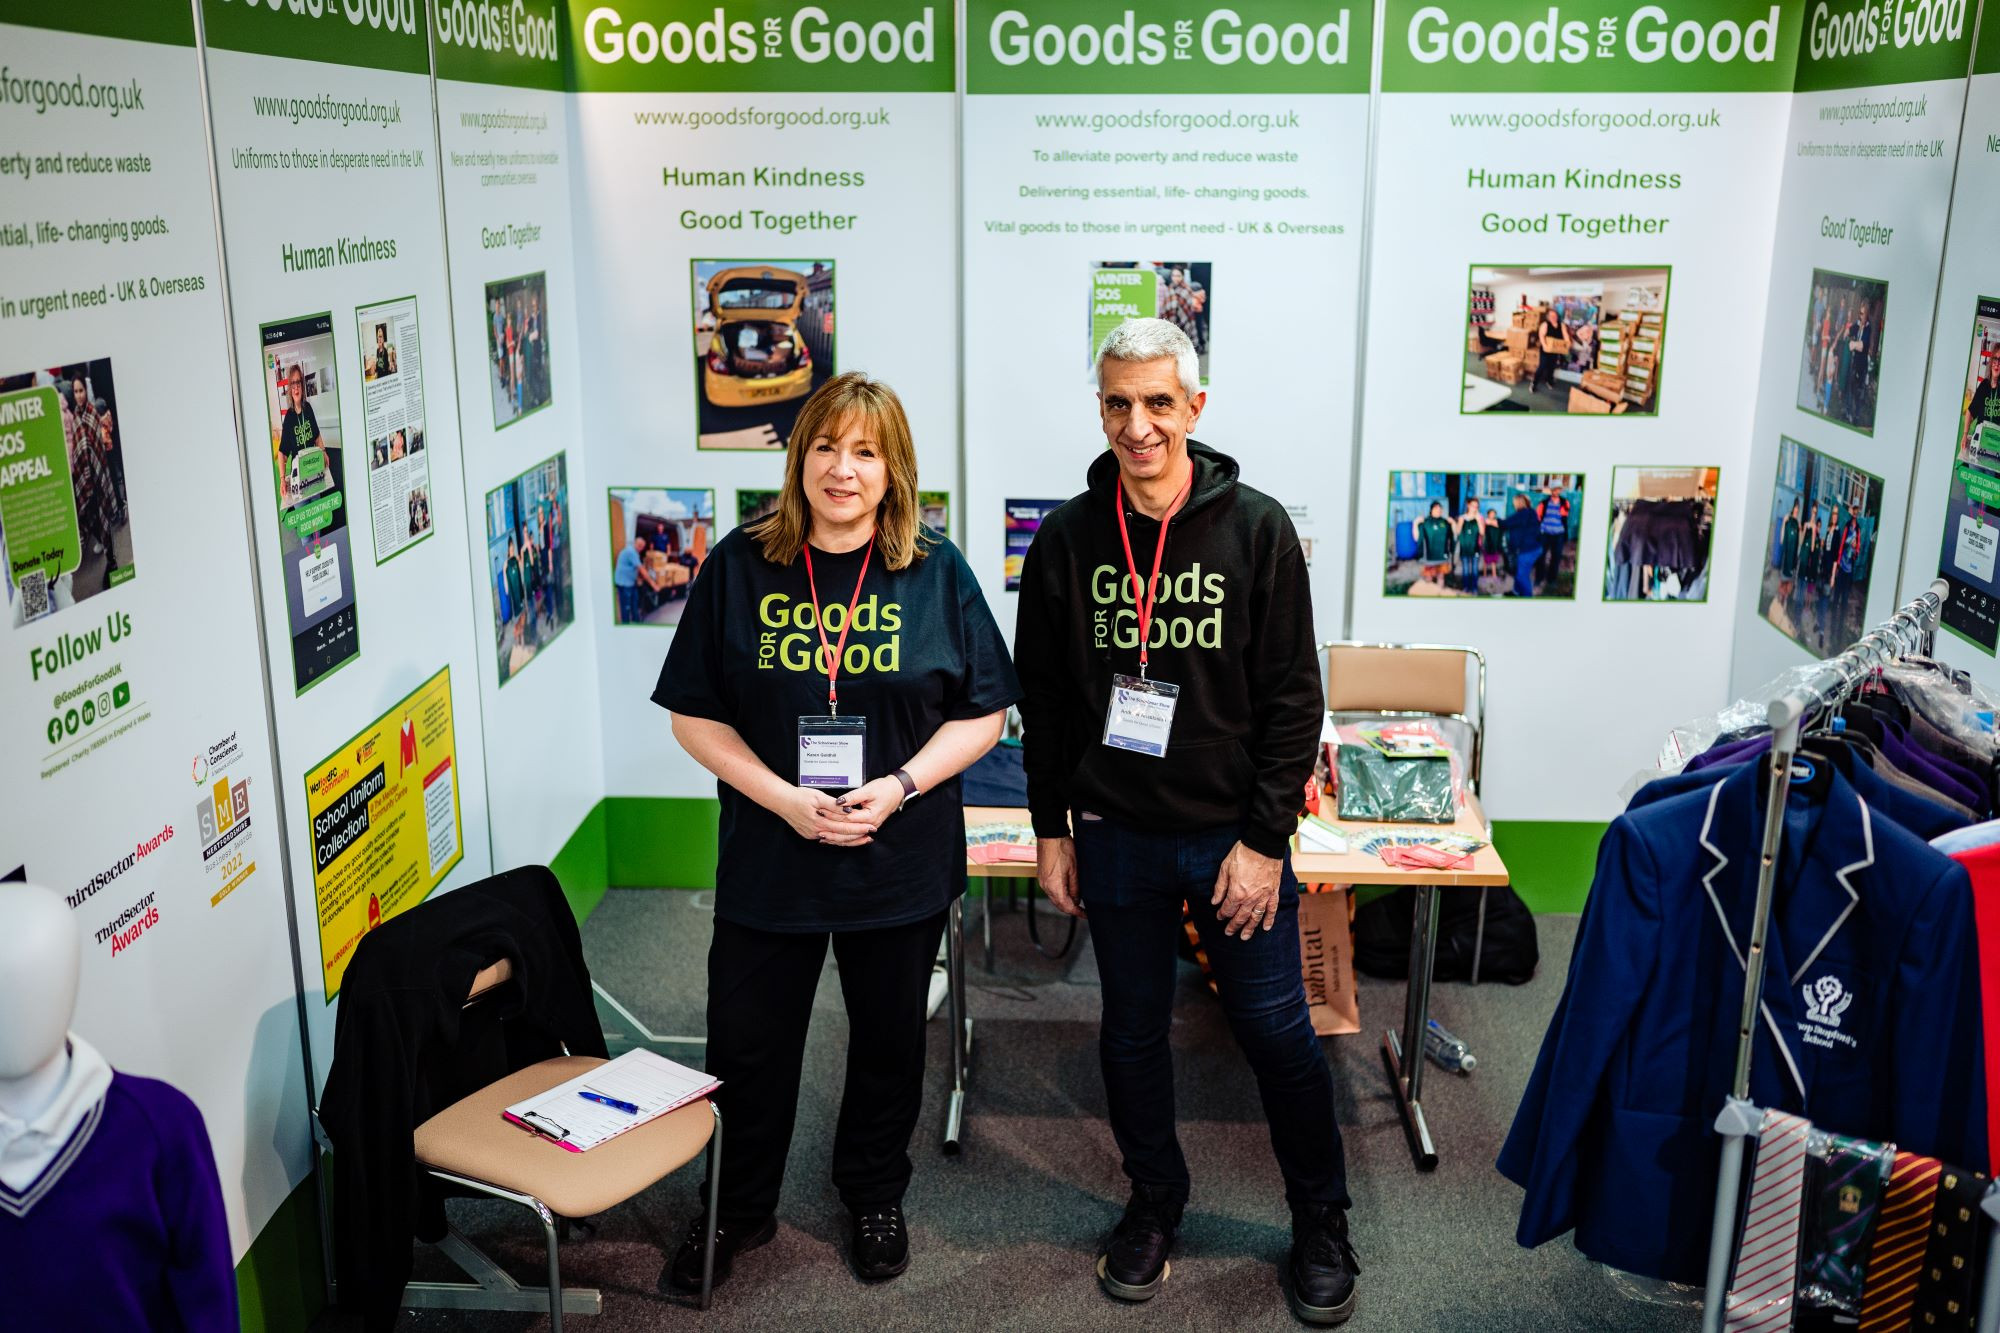 Goods for good at cranmore park